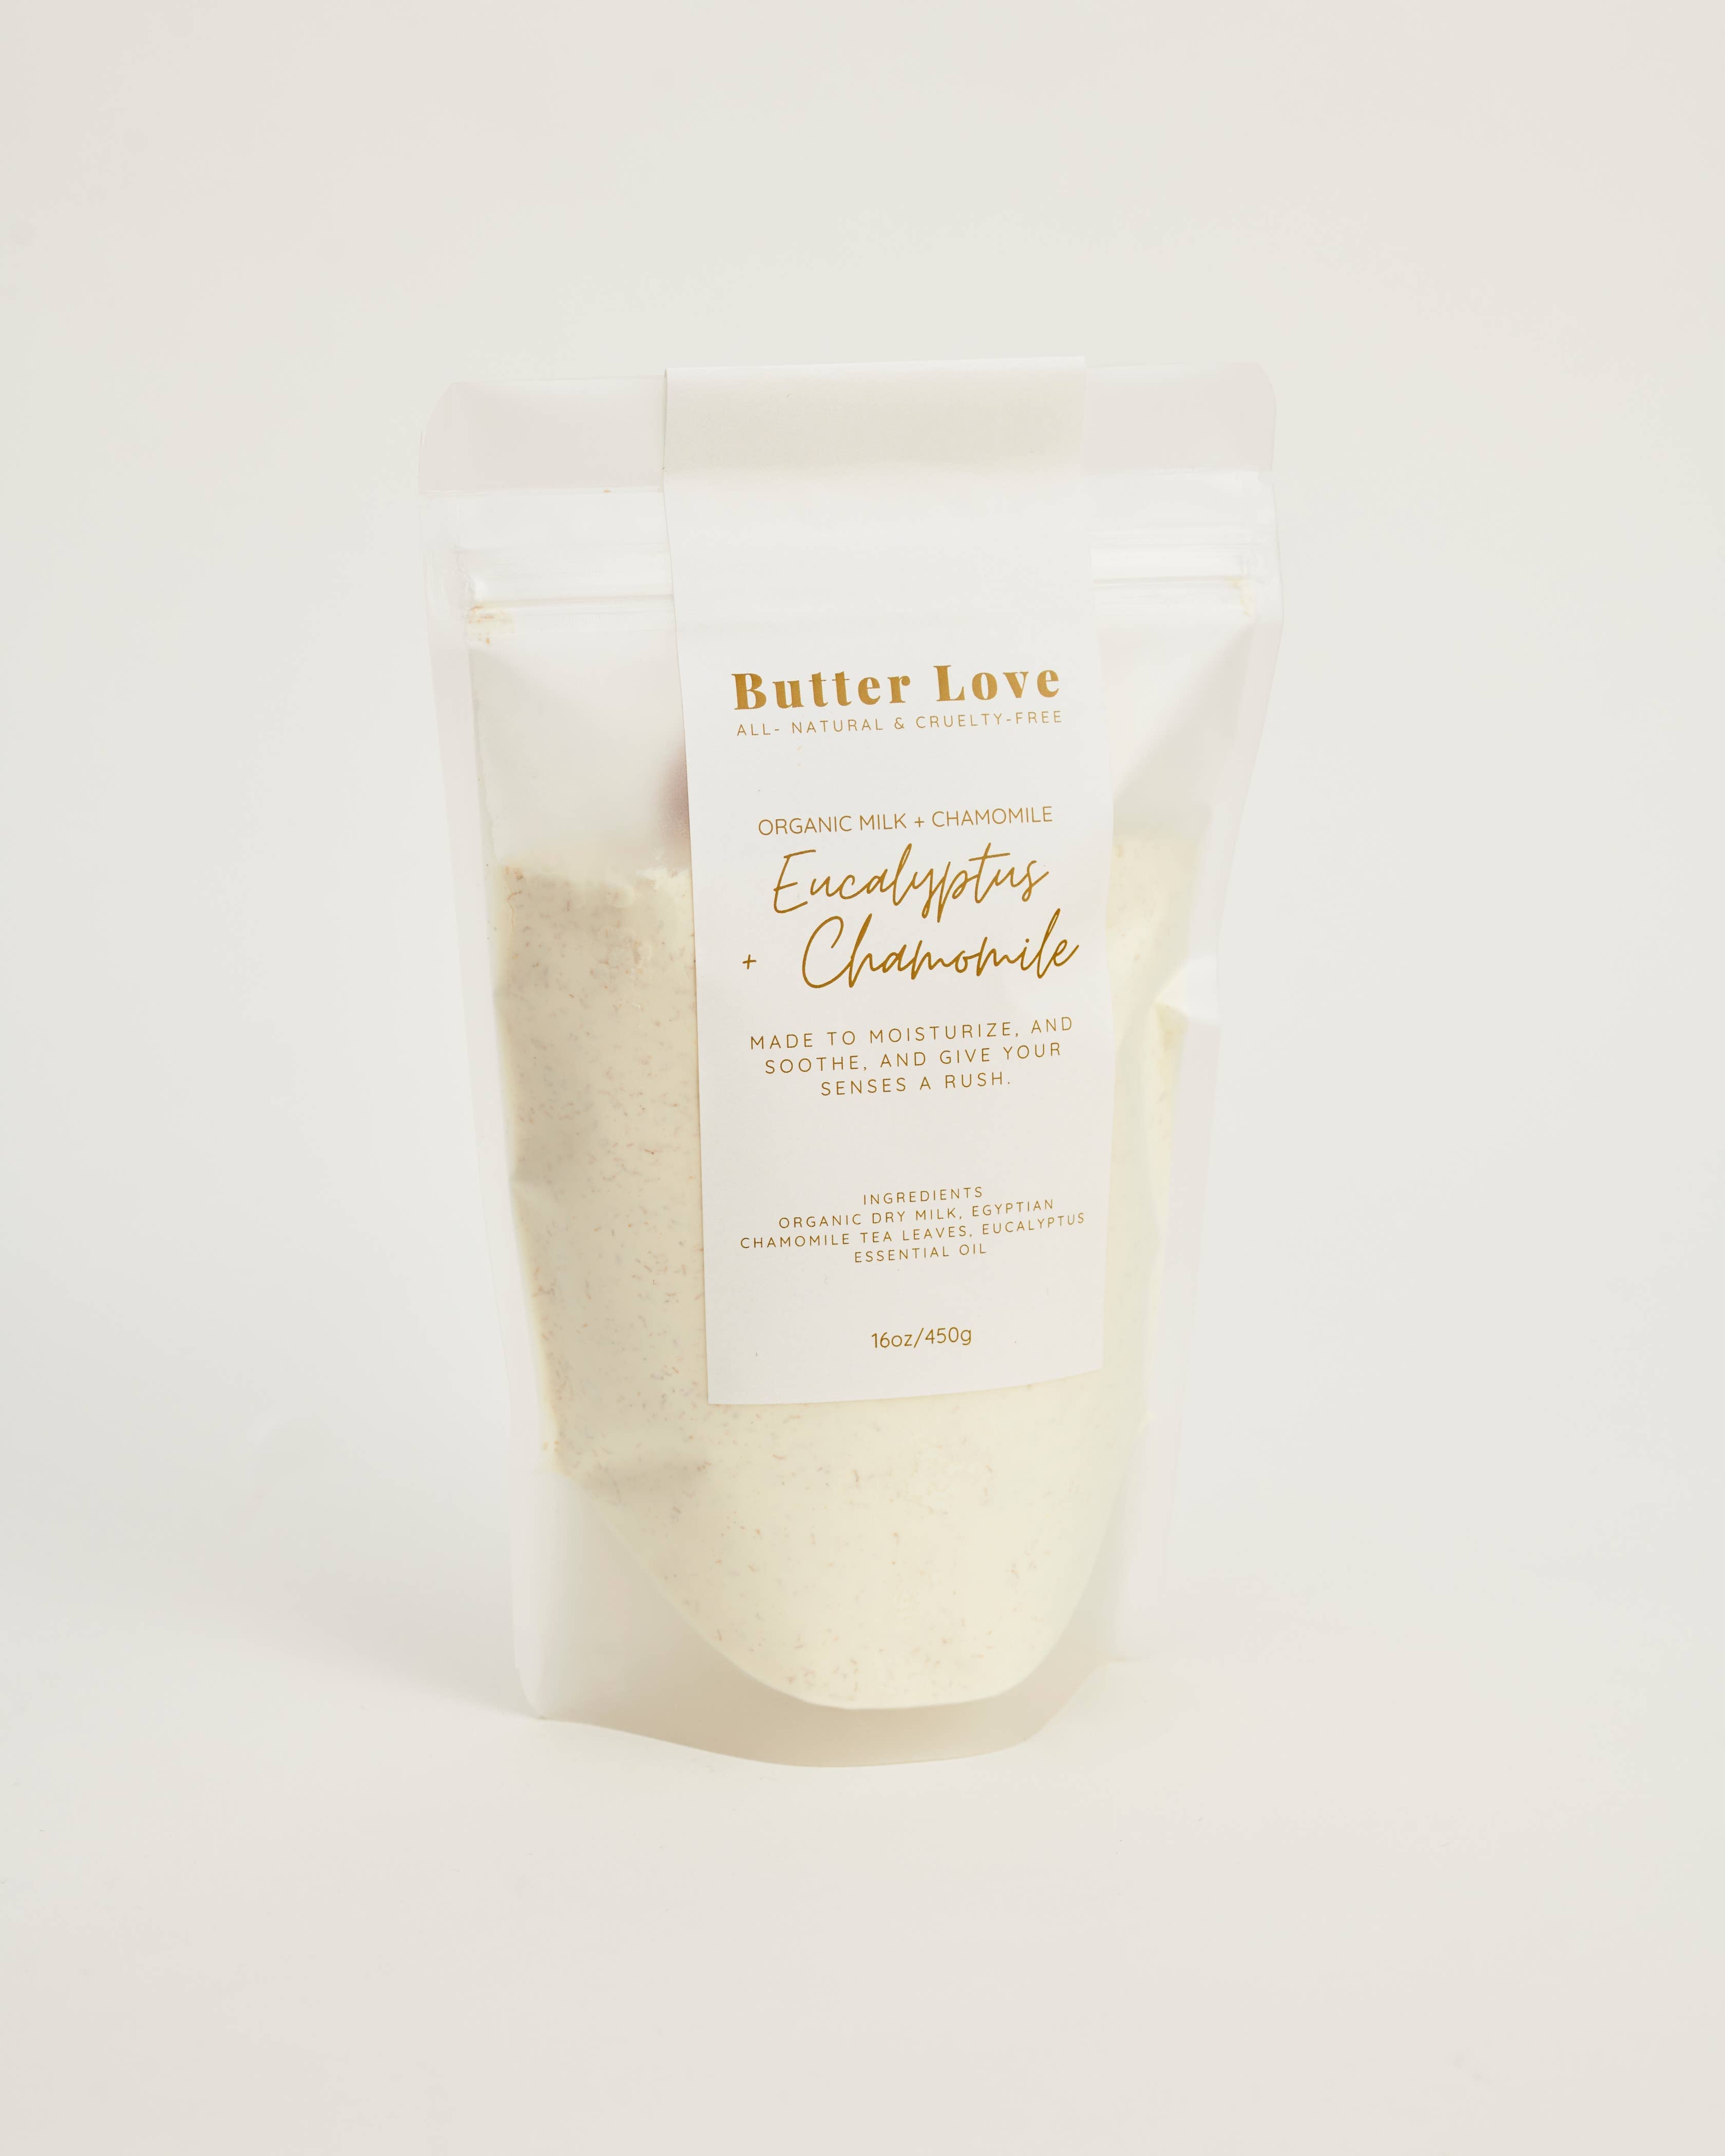 Butter Love by LC Eucalyptus and Chamomile Milk Bath